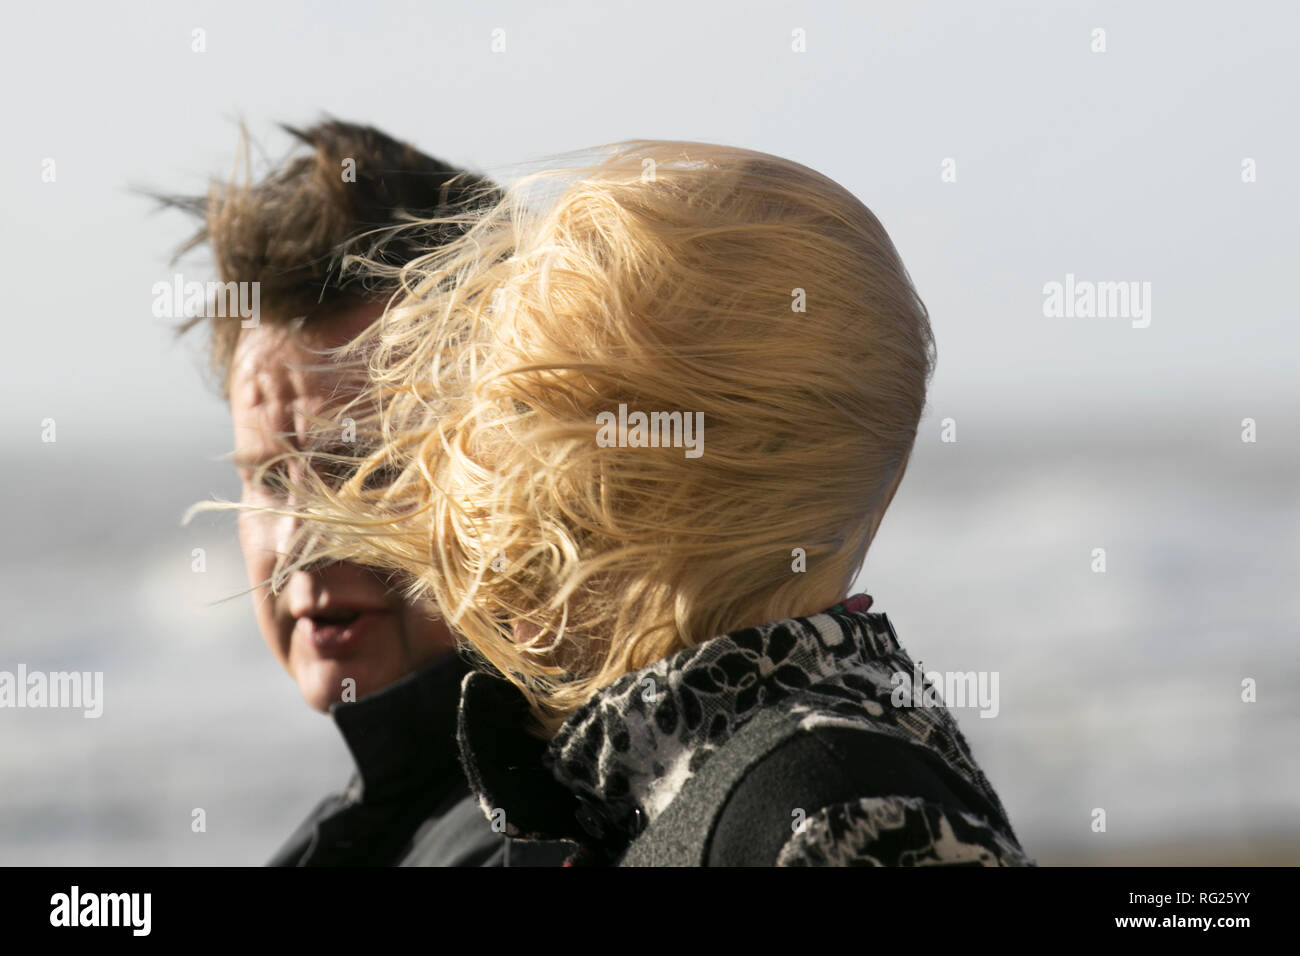 Blackpool, Lancashire. 27th Jan, 2019. UK Weather. Gale force winds at the coast. Visitors to the seaside town have to endure severe winds with pedestrians being blown over on the seafront promenade. Storm , blow, tempest, flyaway hair, tangled tresses, bad hair day on the seafront promenade. Credit:MediaWorldImages/AlamyLiveNews Stock Photo